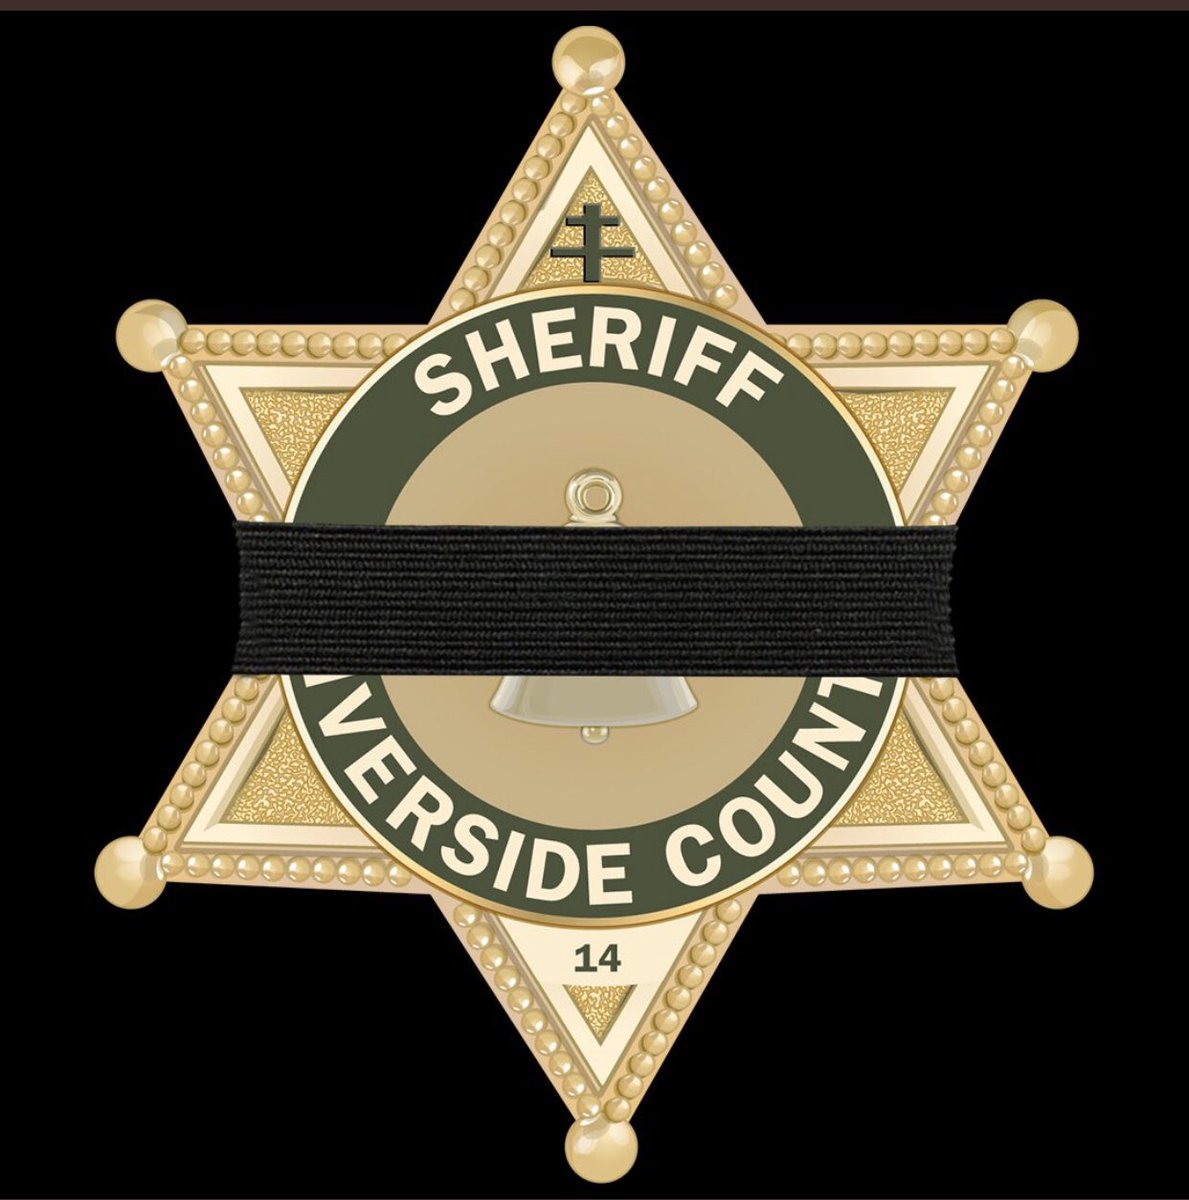 Last night RSO Deputy Dave Werksman lost his fight w. COVID 19, this is RSO’s 2nd death related to this invisible beast. Please pray for them. #RSO